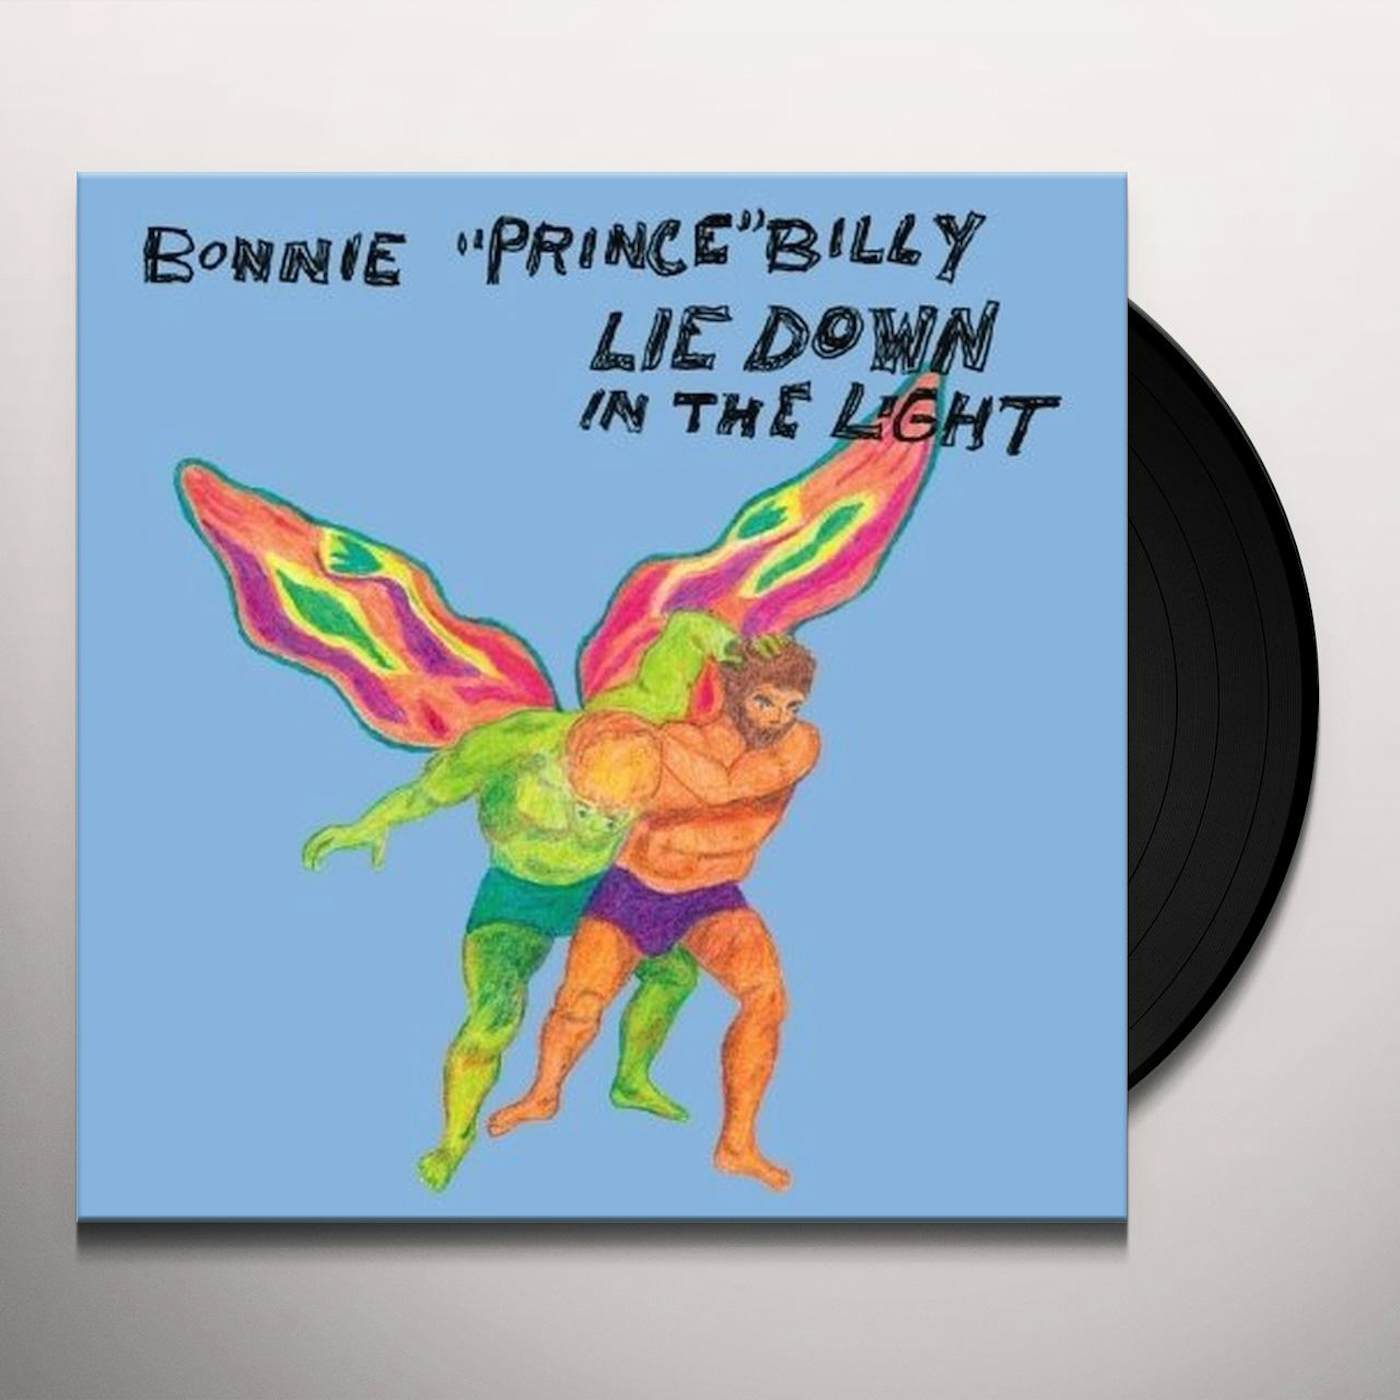 Bonnie Prince Billy LIE DOWN IN THE NIGHT Vinyl Record